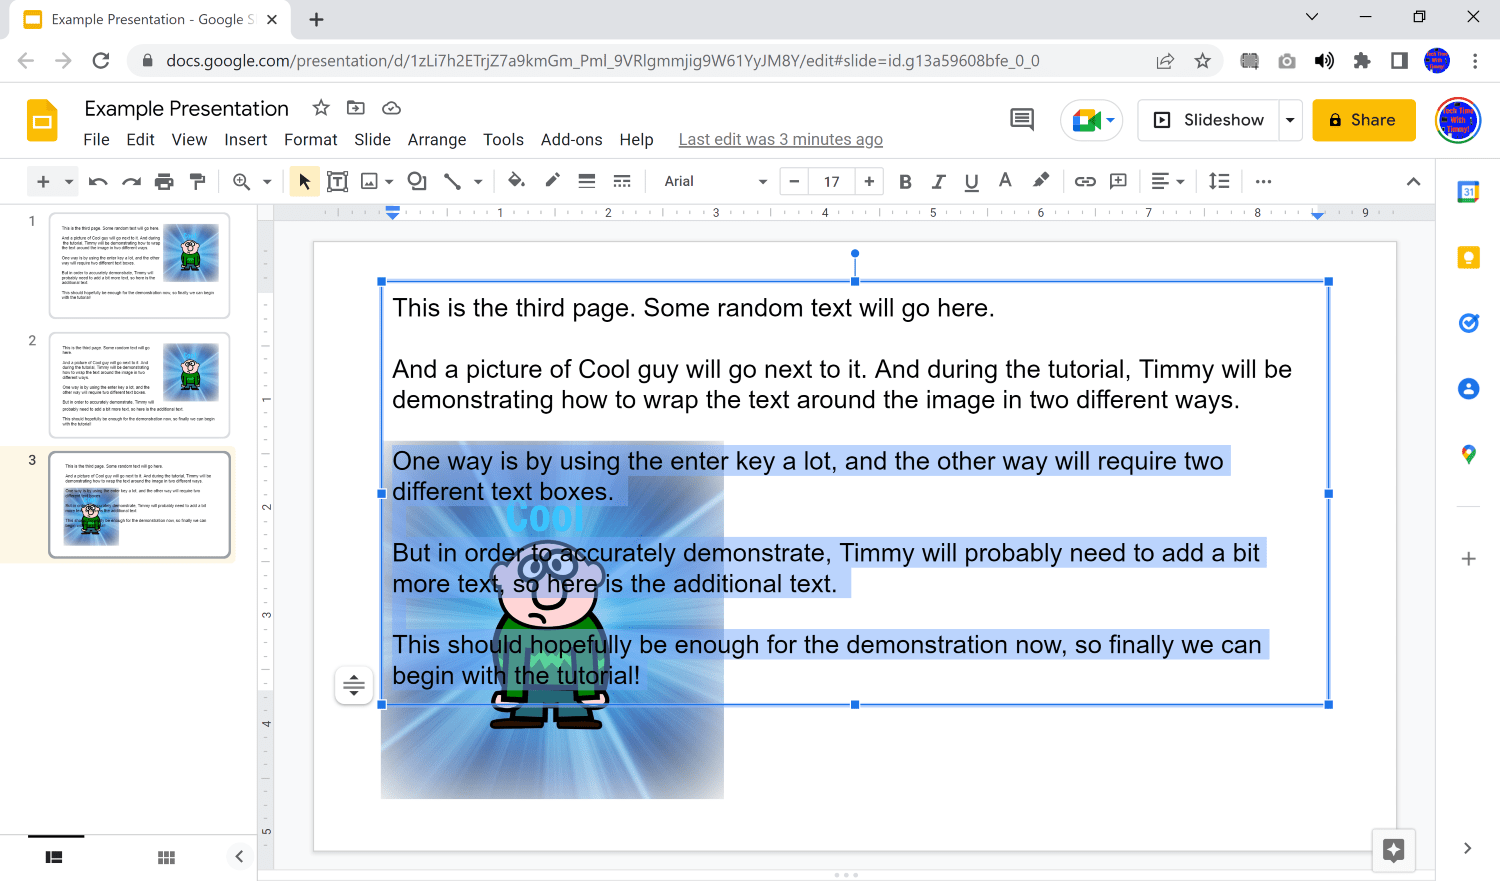 how to text wrap on google slides